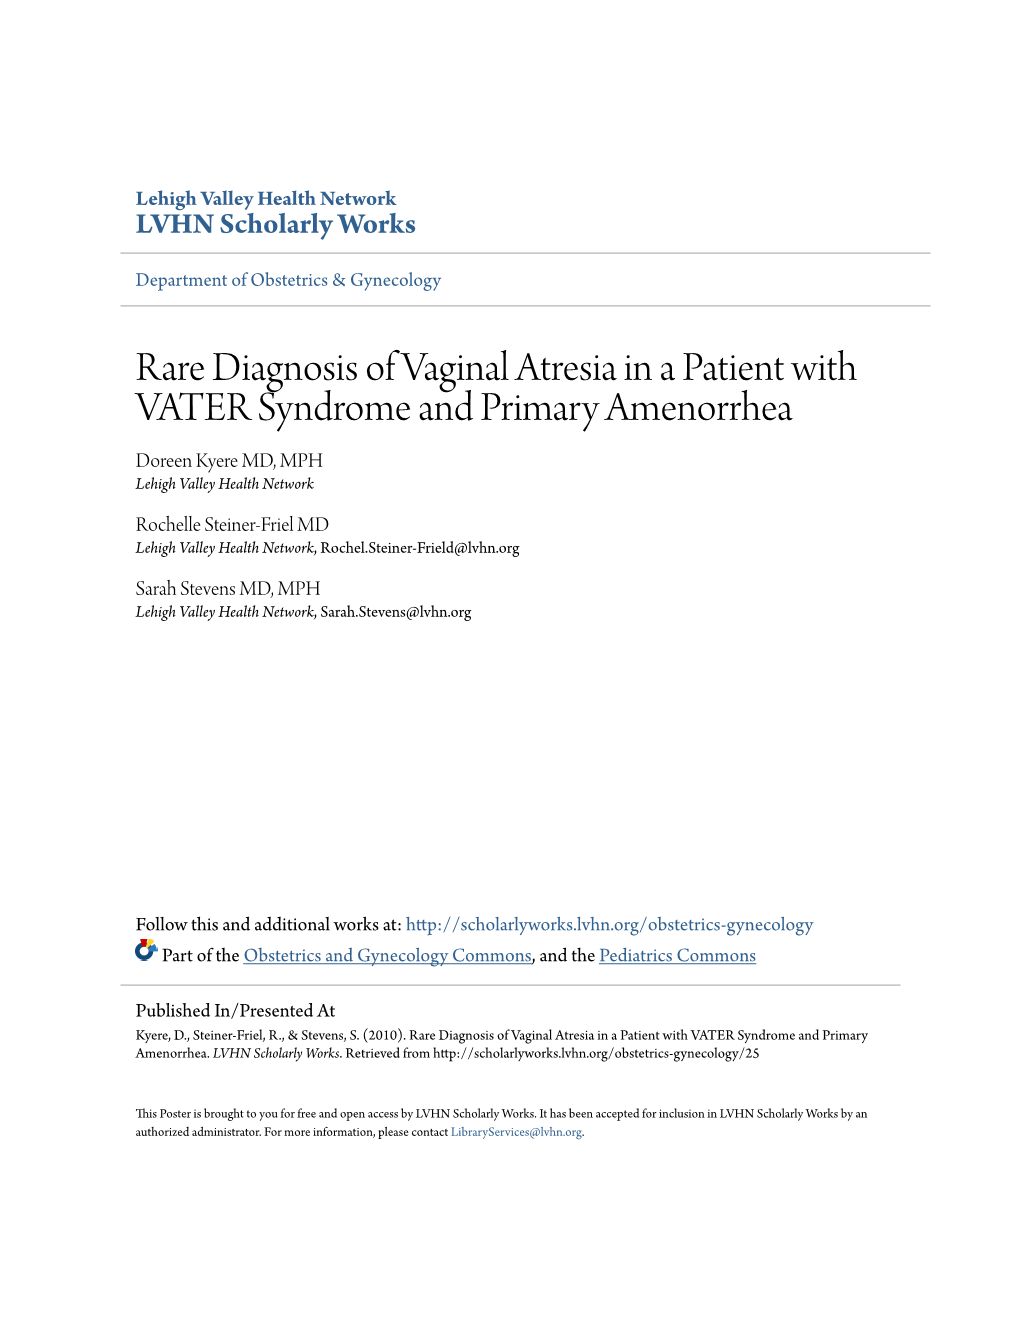 Rare Diagnosis of Vaginal Atresia in a Patient with VATER Syndrome and Primary Amenorrhea Doreen Kyere MD, MPH Lehigh Valley Health Network